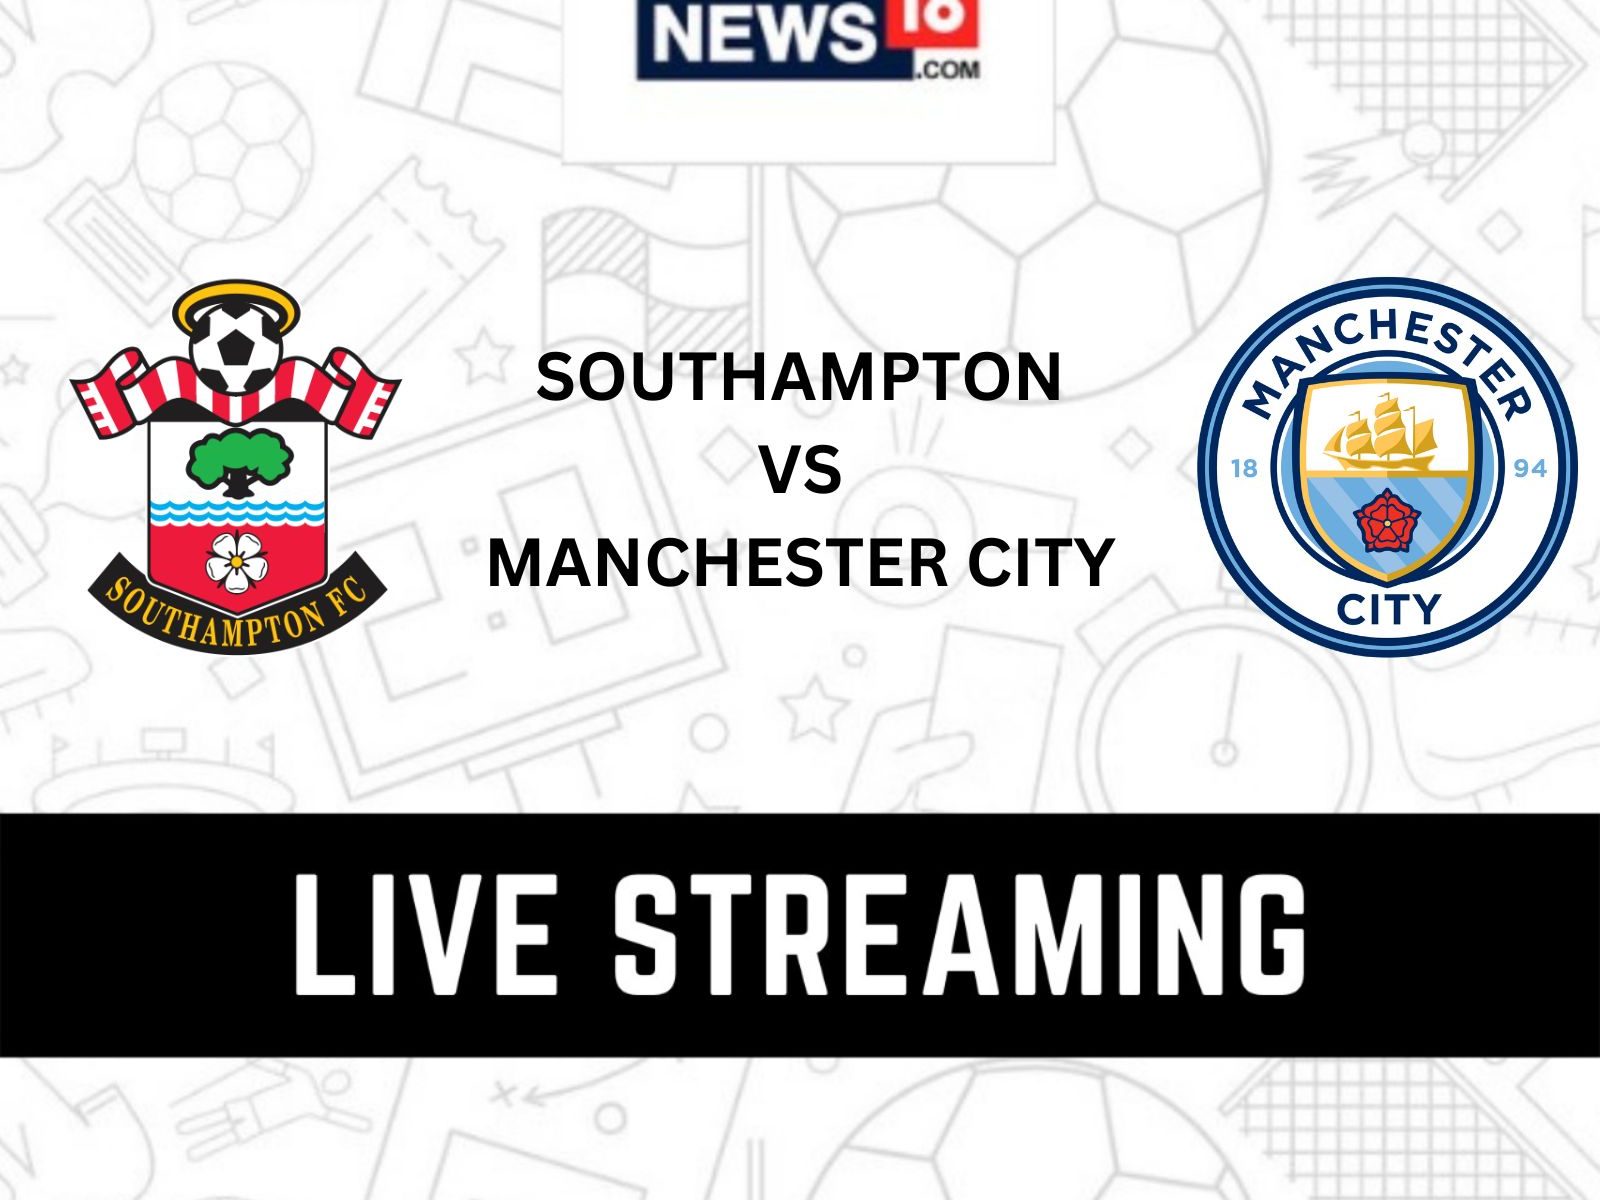 Southampton vs Manchester City EFL Cup Live Streaming When and Where to Watch Southampton vs Manchester City Match Live?